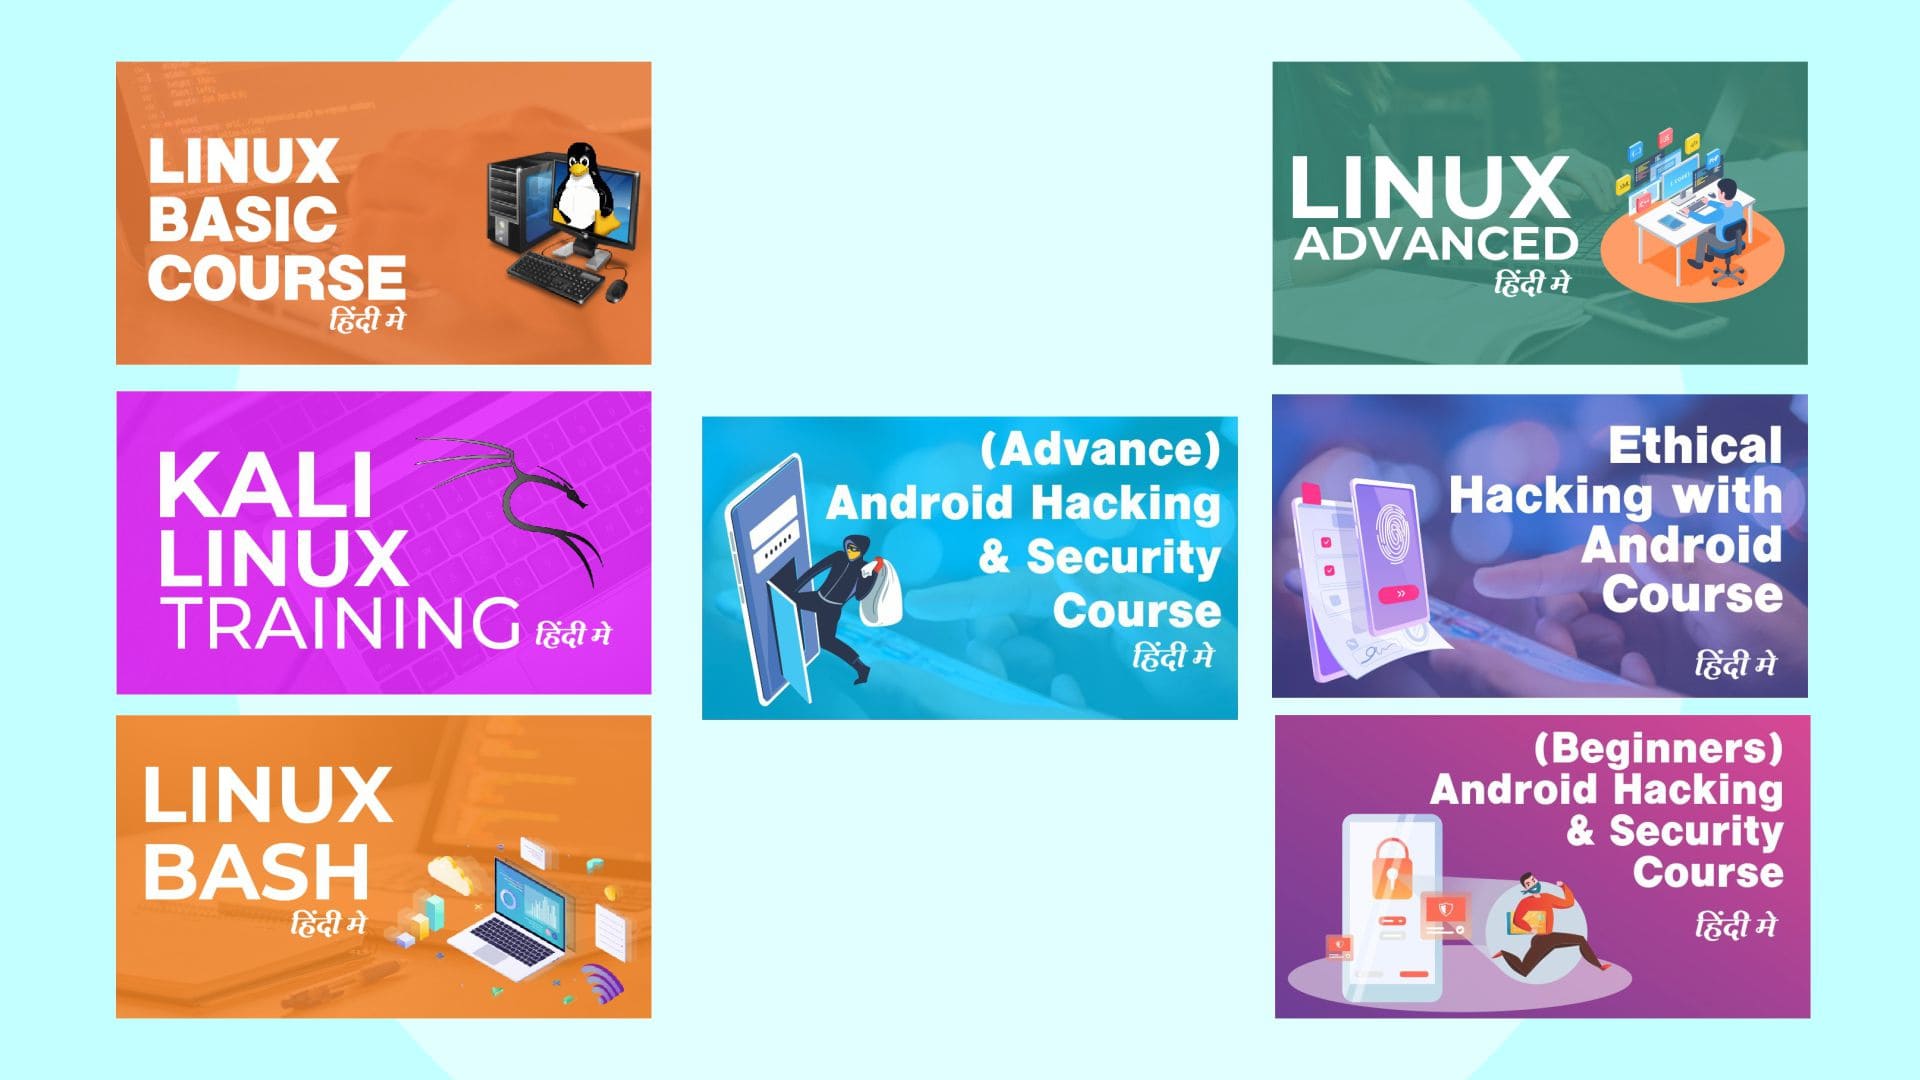 Hacking With Android + (Beginners) Android Hacking + (Advance) Android Hacking + Linux Master Course  